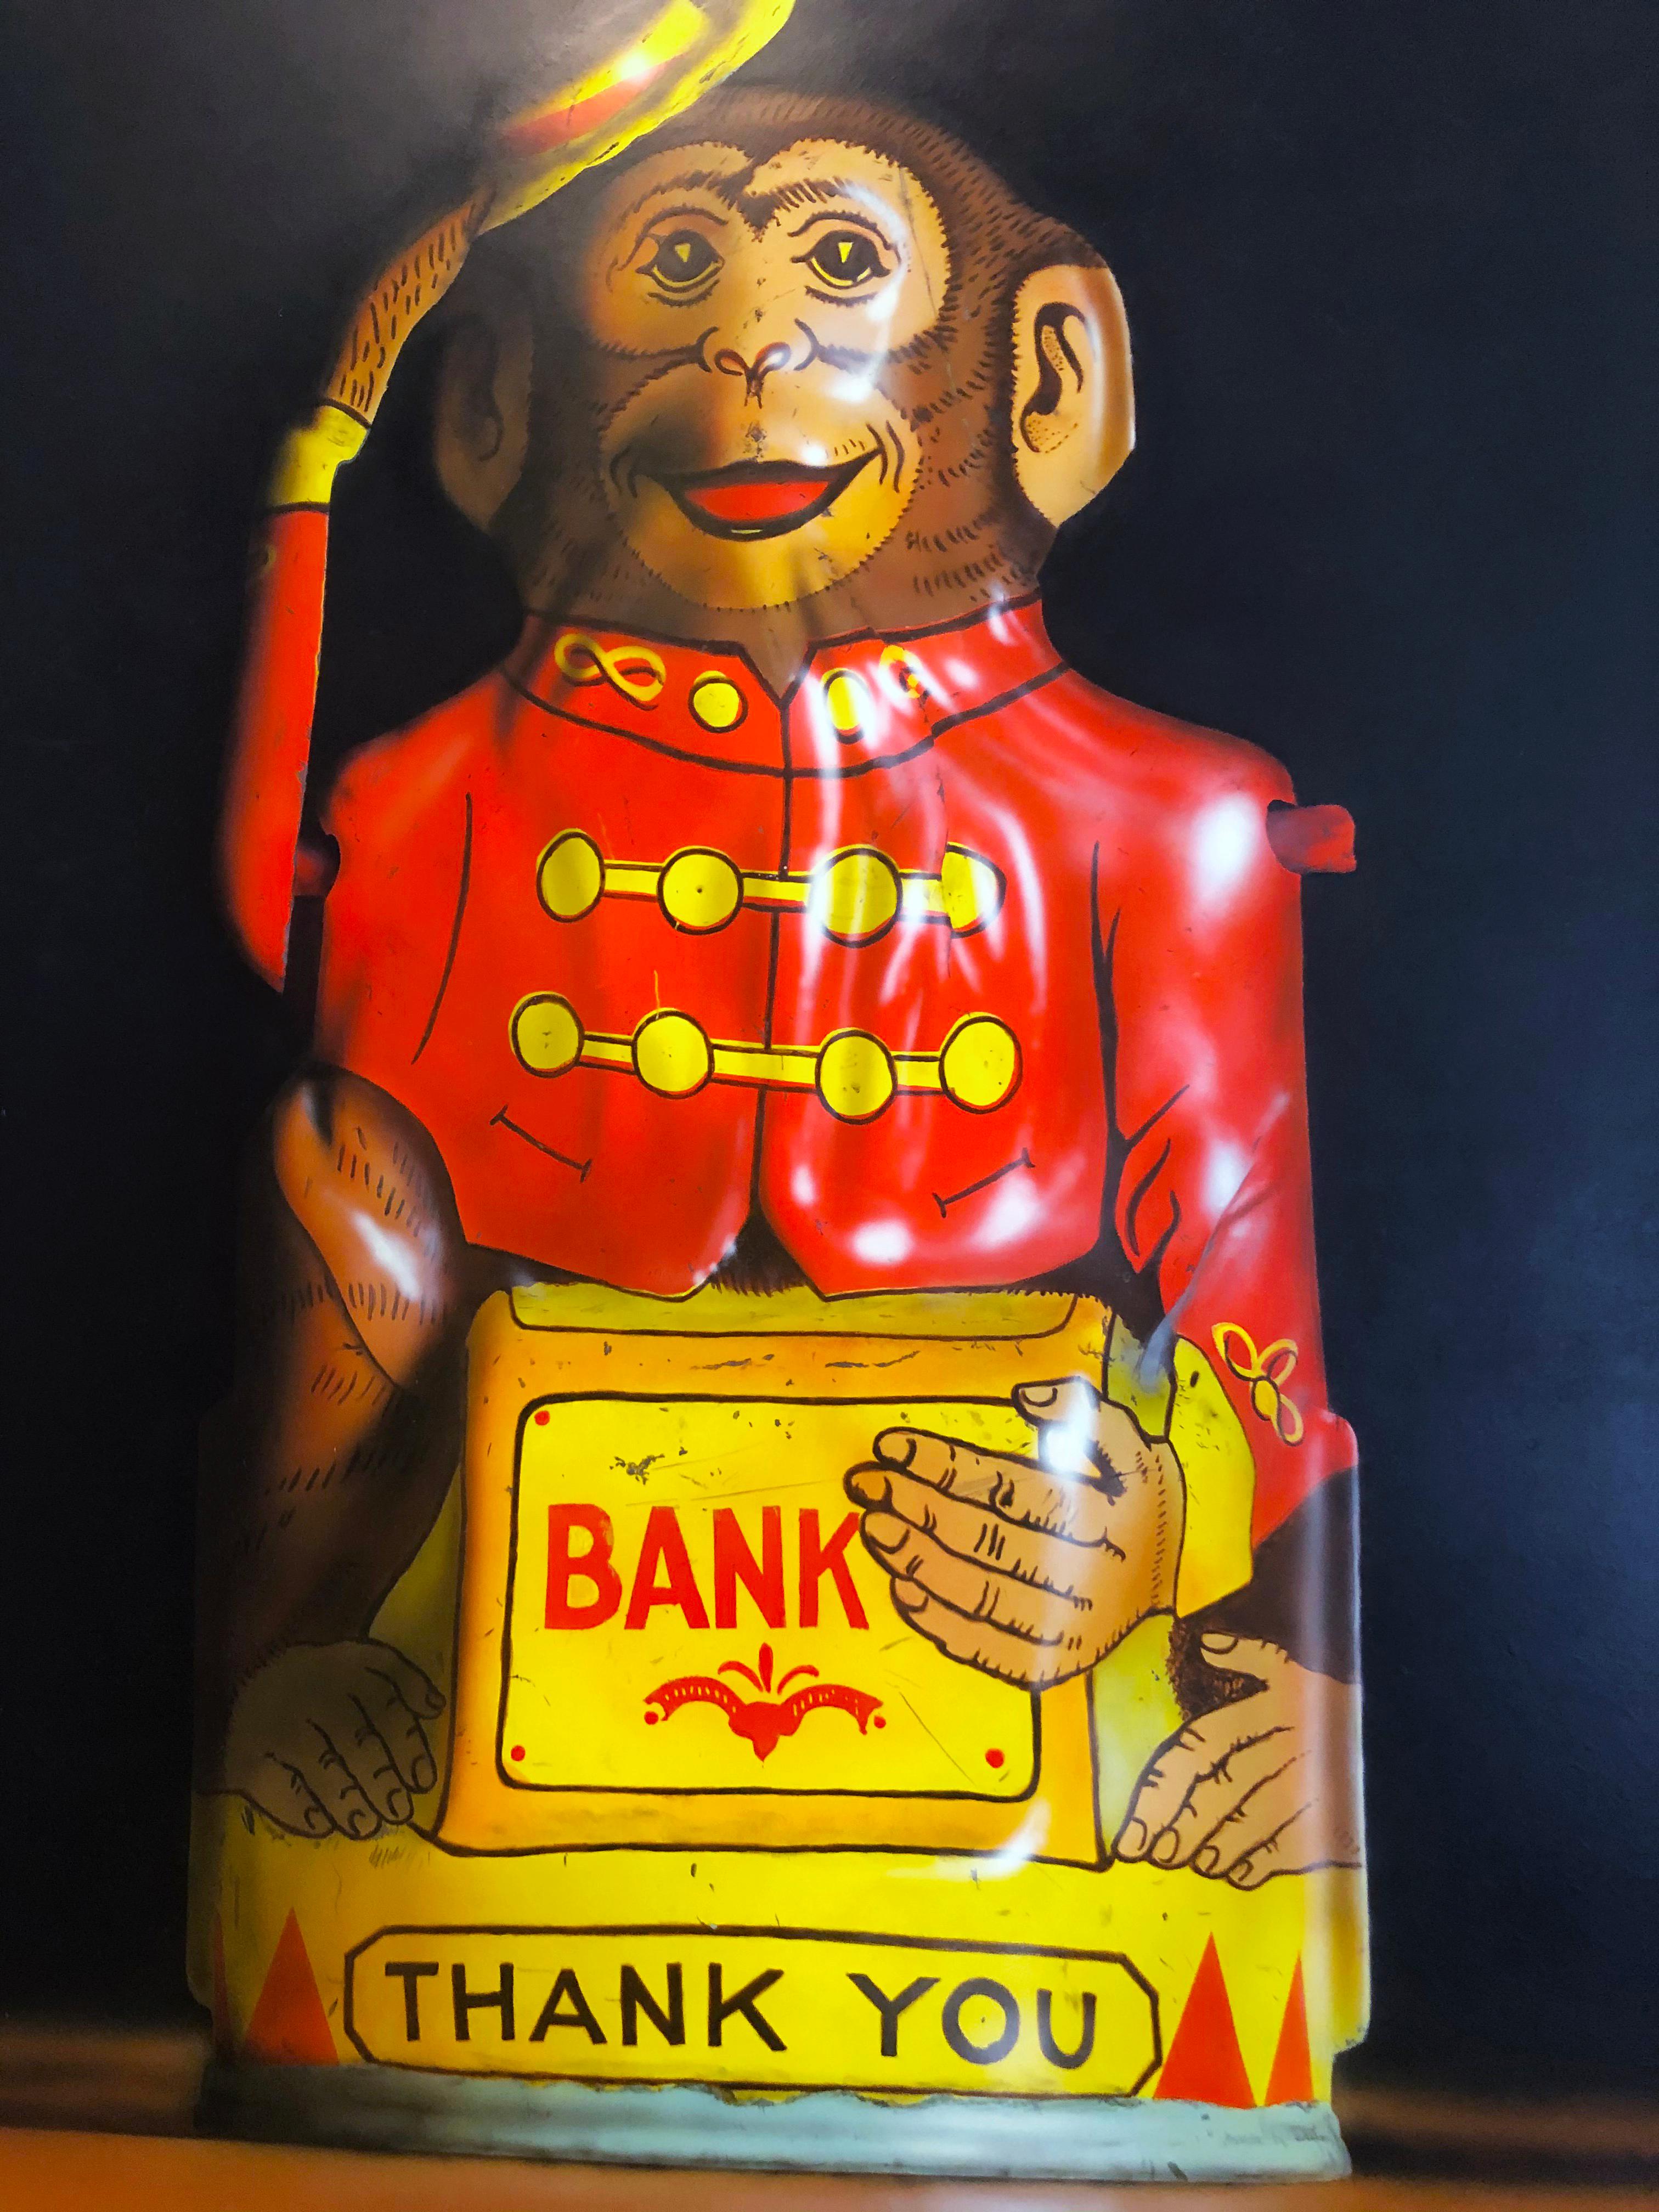 'Two Toy Banks' 1982 by American artist Cesar J. Santander. Oil on panel, 27.75 x 34.5 in. This painting features a finely detailed monkey and clown piggy banks rendered in rich colors of red, yellow, blue, brown and black. Framed in a gold